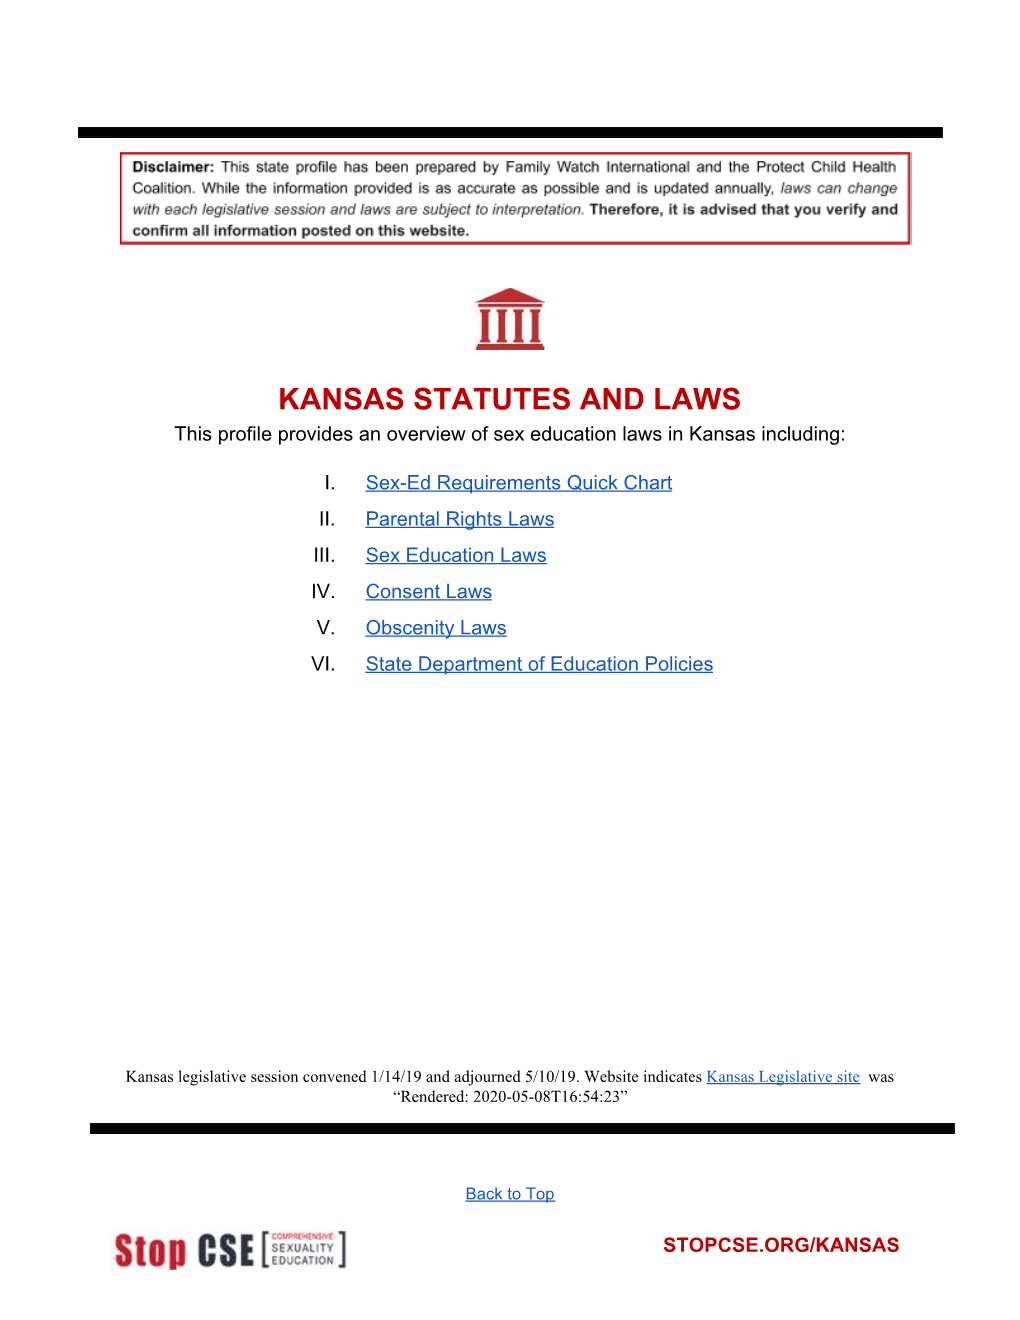 KANSAS STATUTES and LAWS This Profile Provides an Overview of Sex Education Laws in Kansas Including